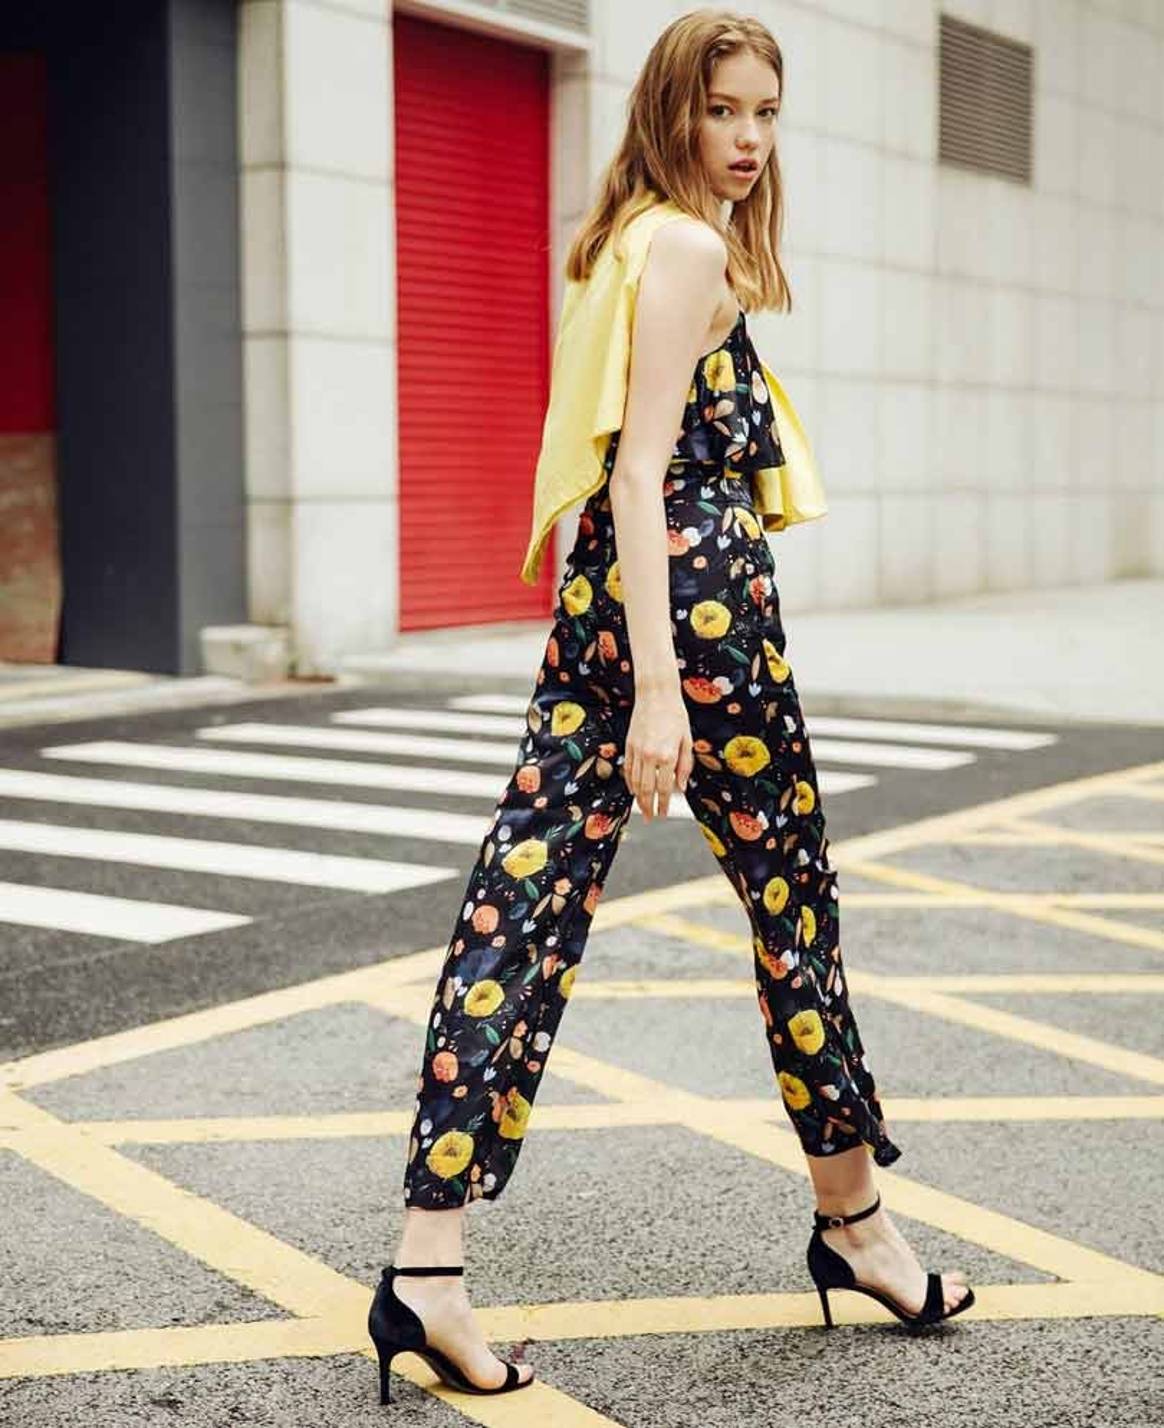 Chinese fashion brand Urban Revivo coming to the UK